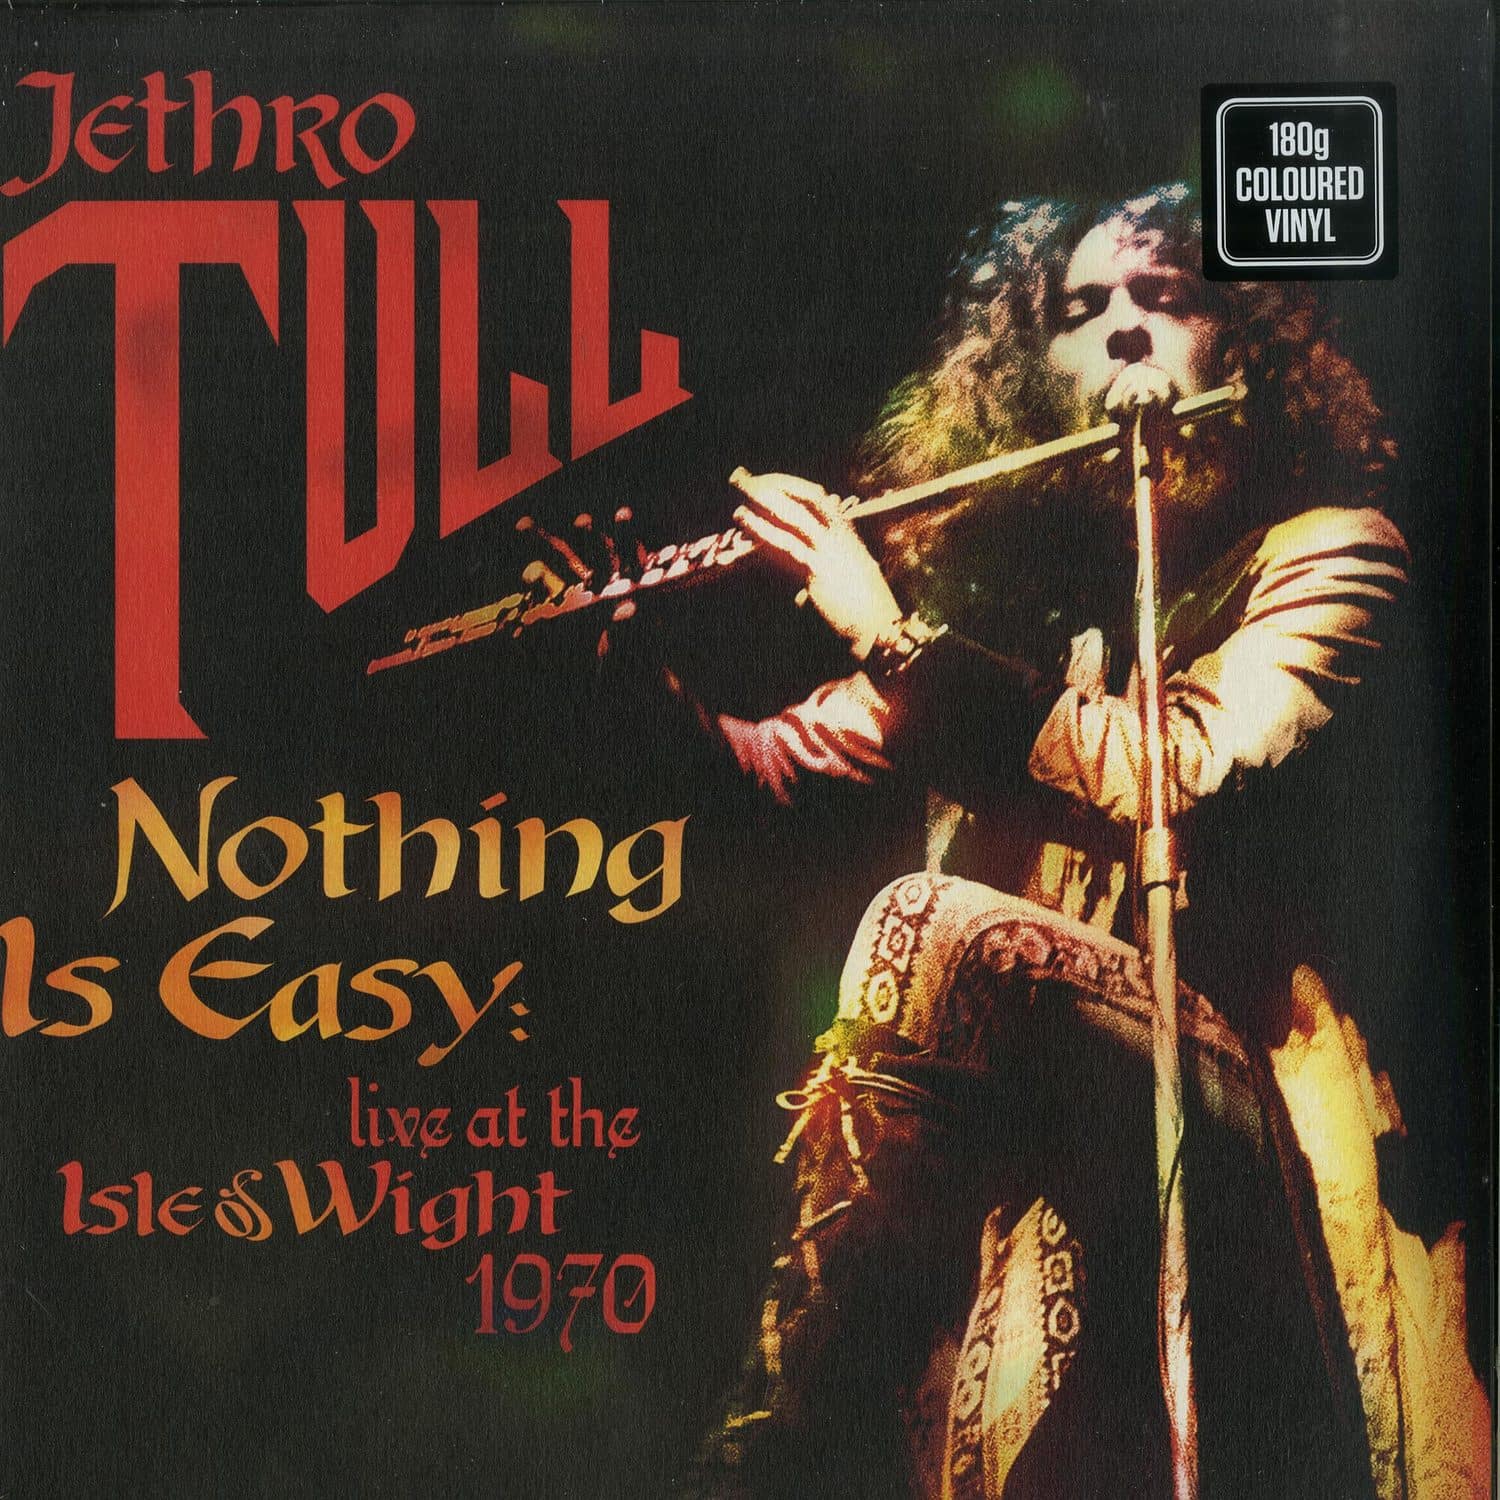 Jethro Tull - NOTHING IS EASY - LIVE AT THE ISLE OF WIGHT 